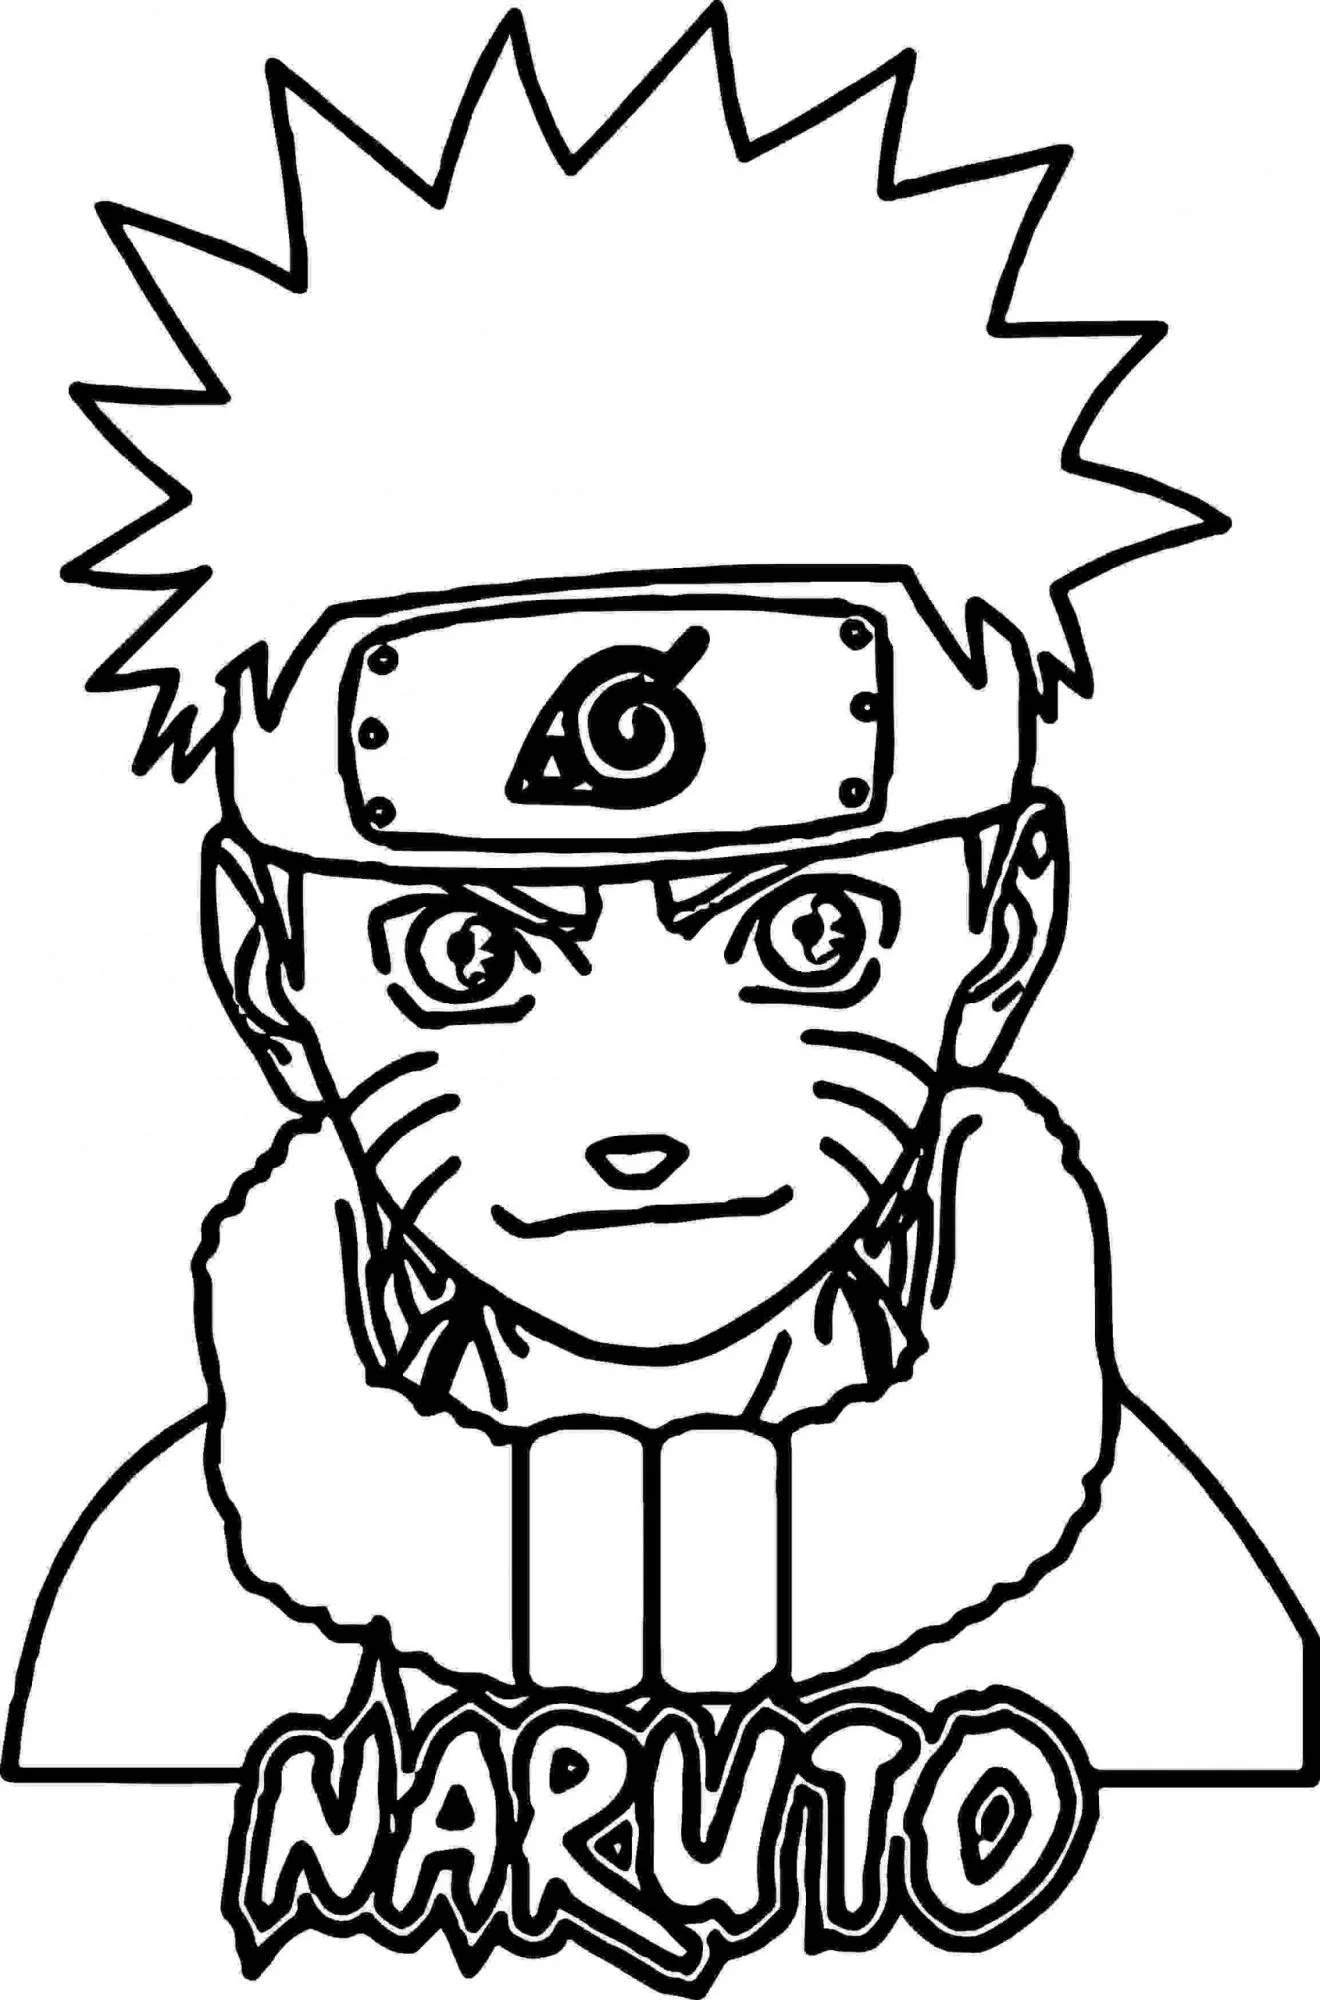 Naruto In Childhood